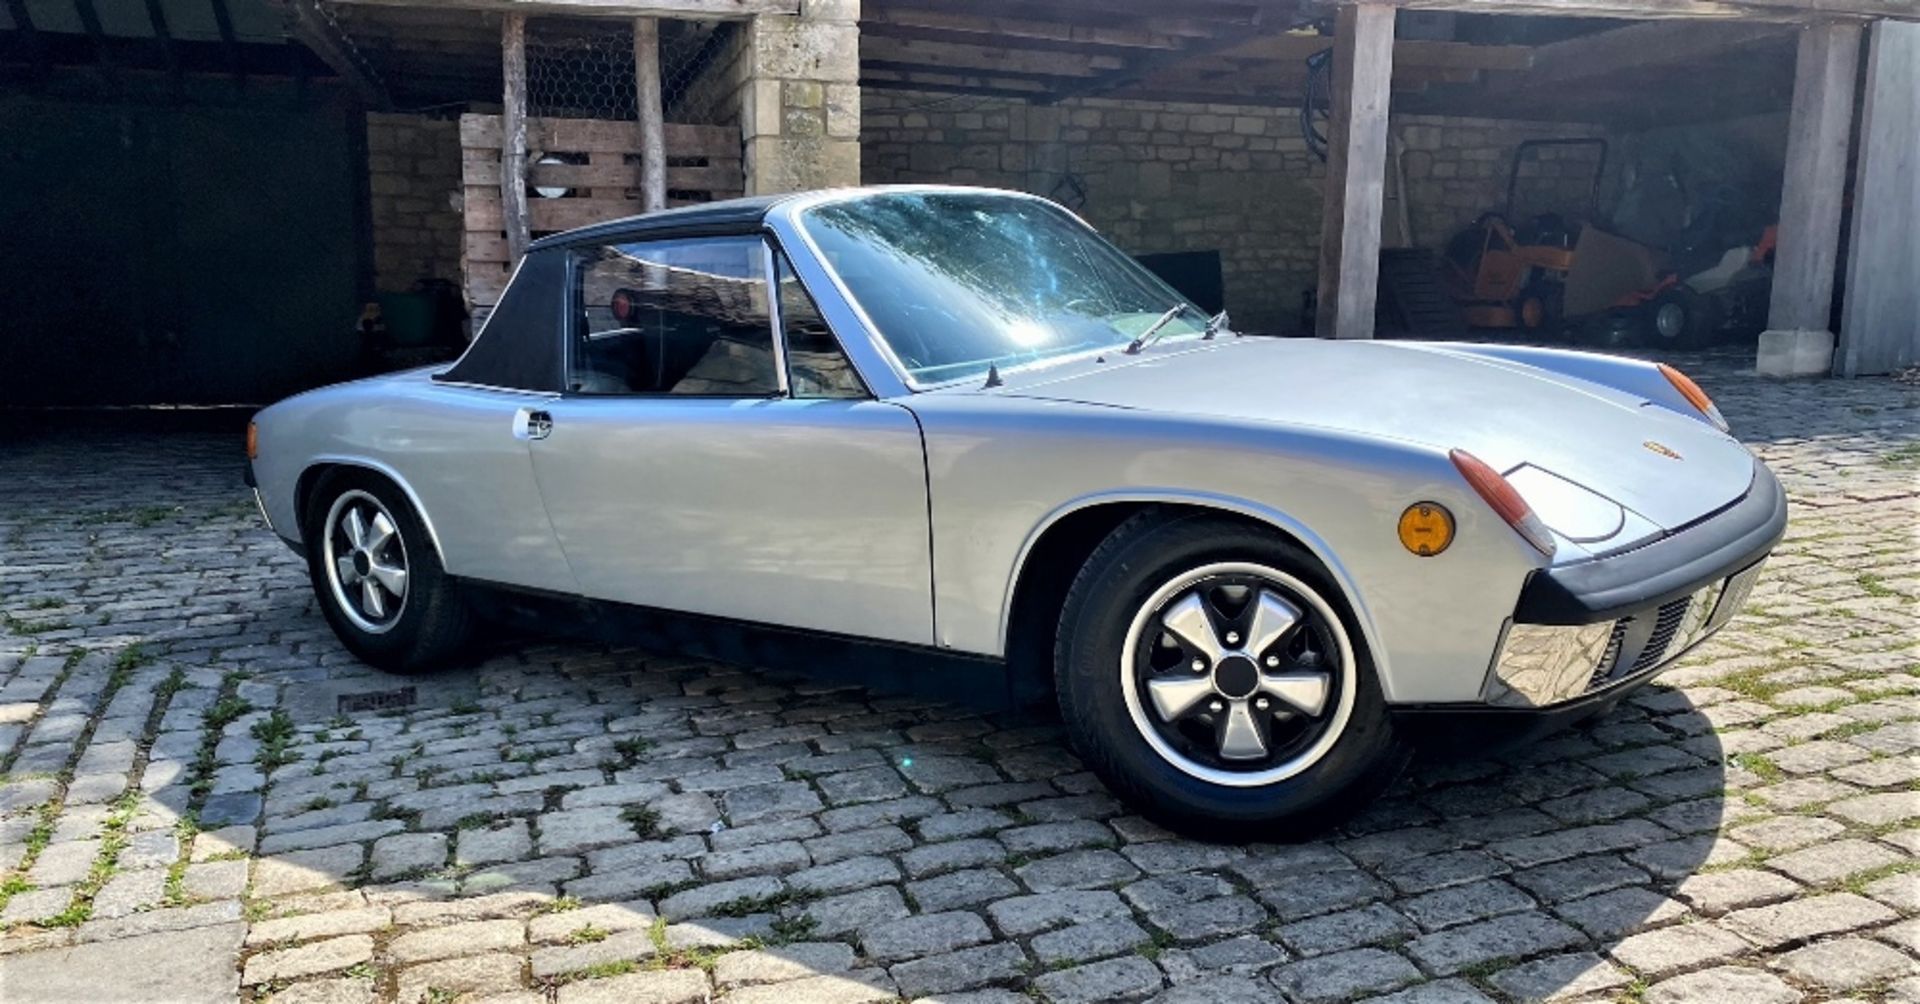 1975 PORSCHE 914 Registration Number: JHU 93N Chassis Number: 4752908006 Recorded Mileage: 100,914